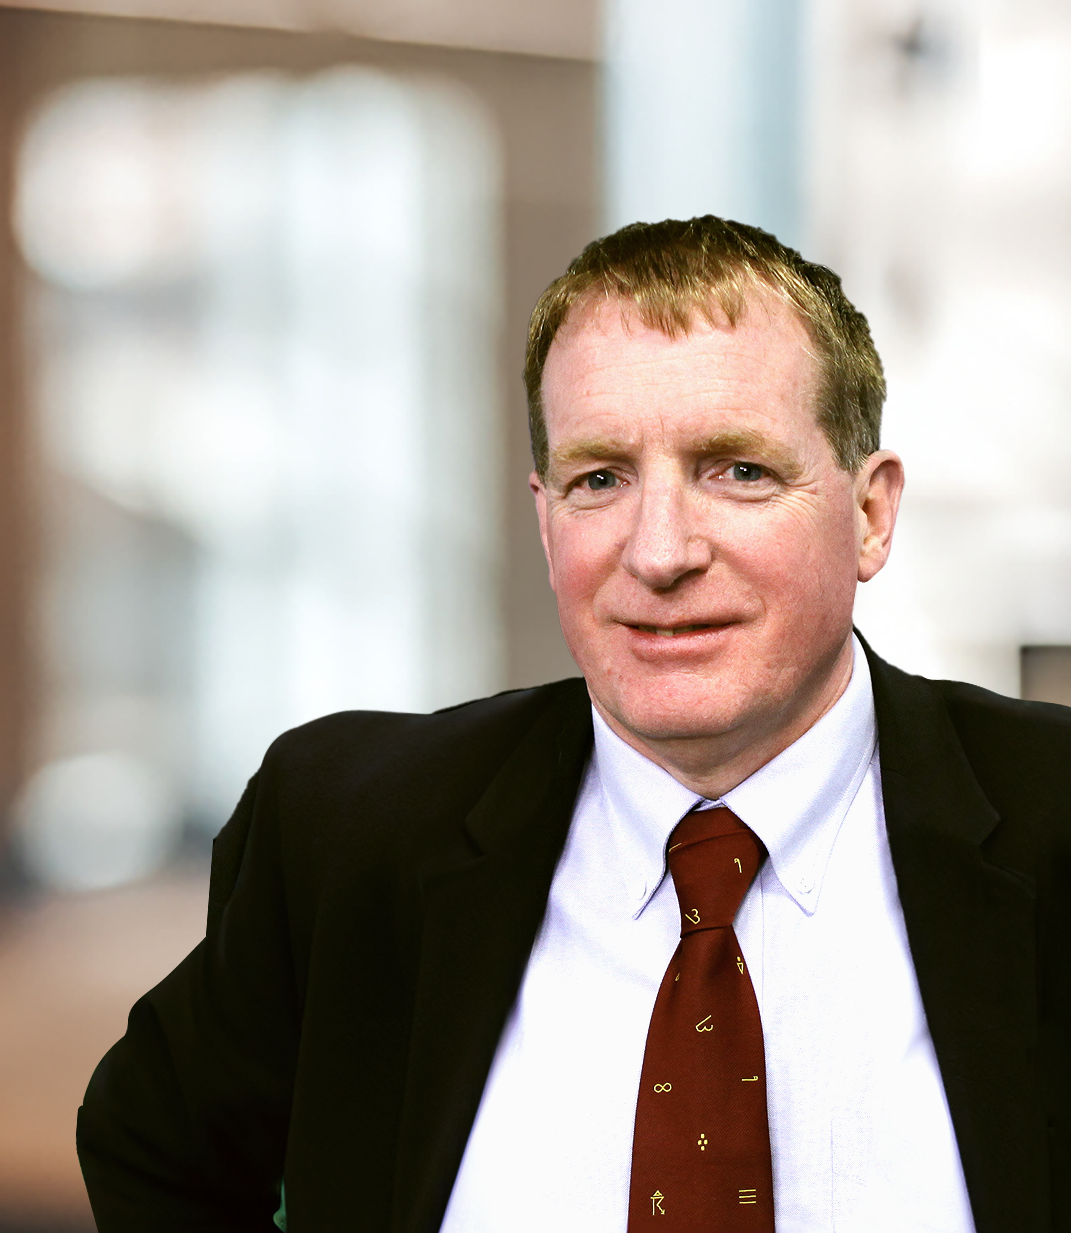 Peter Neilley, Director of Weather Forecasting Sciences and Technologies, The Weather Company